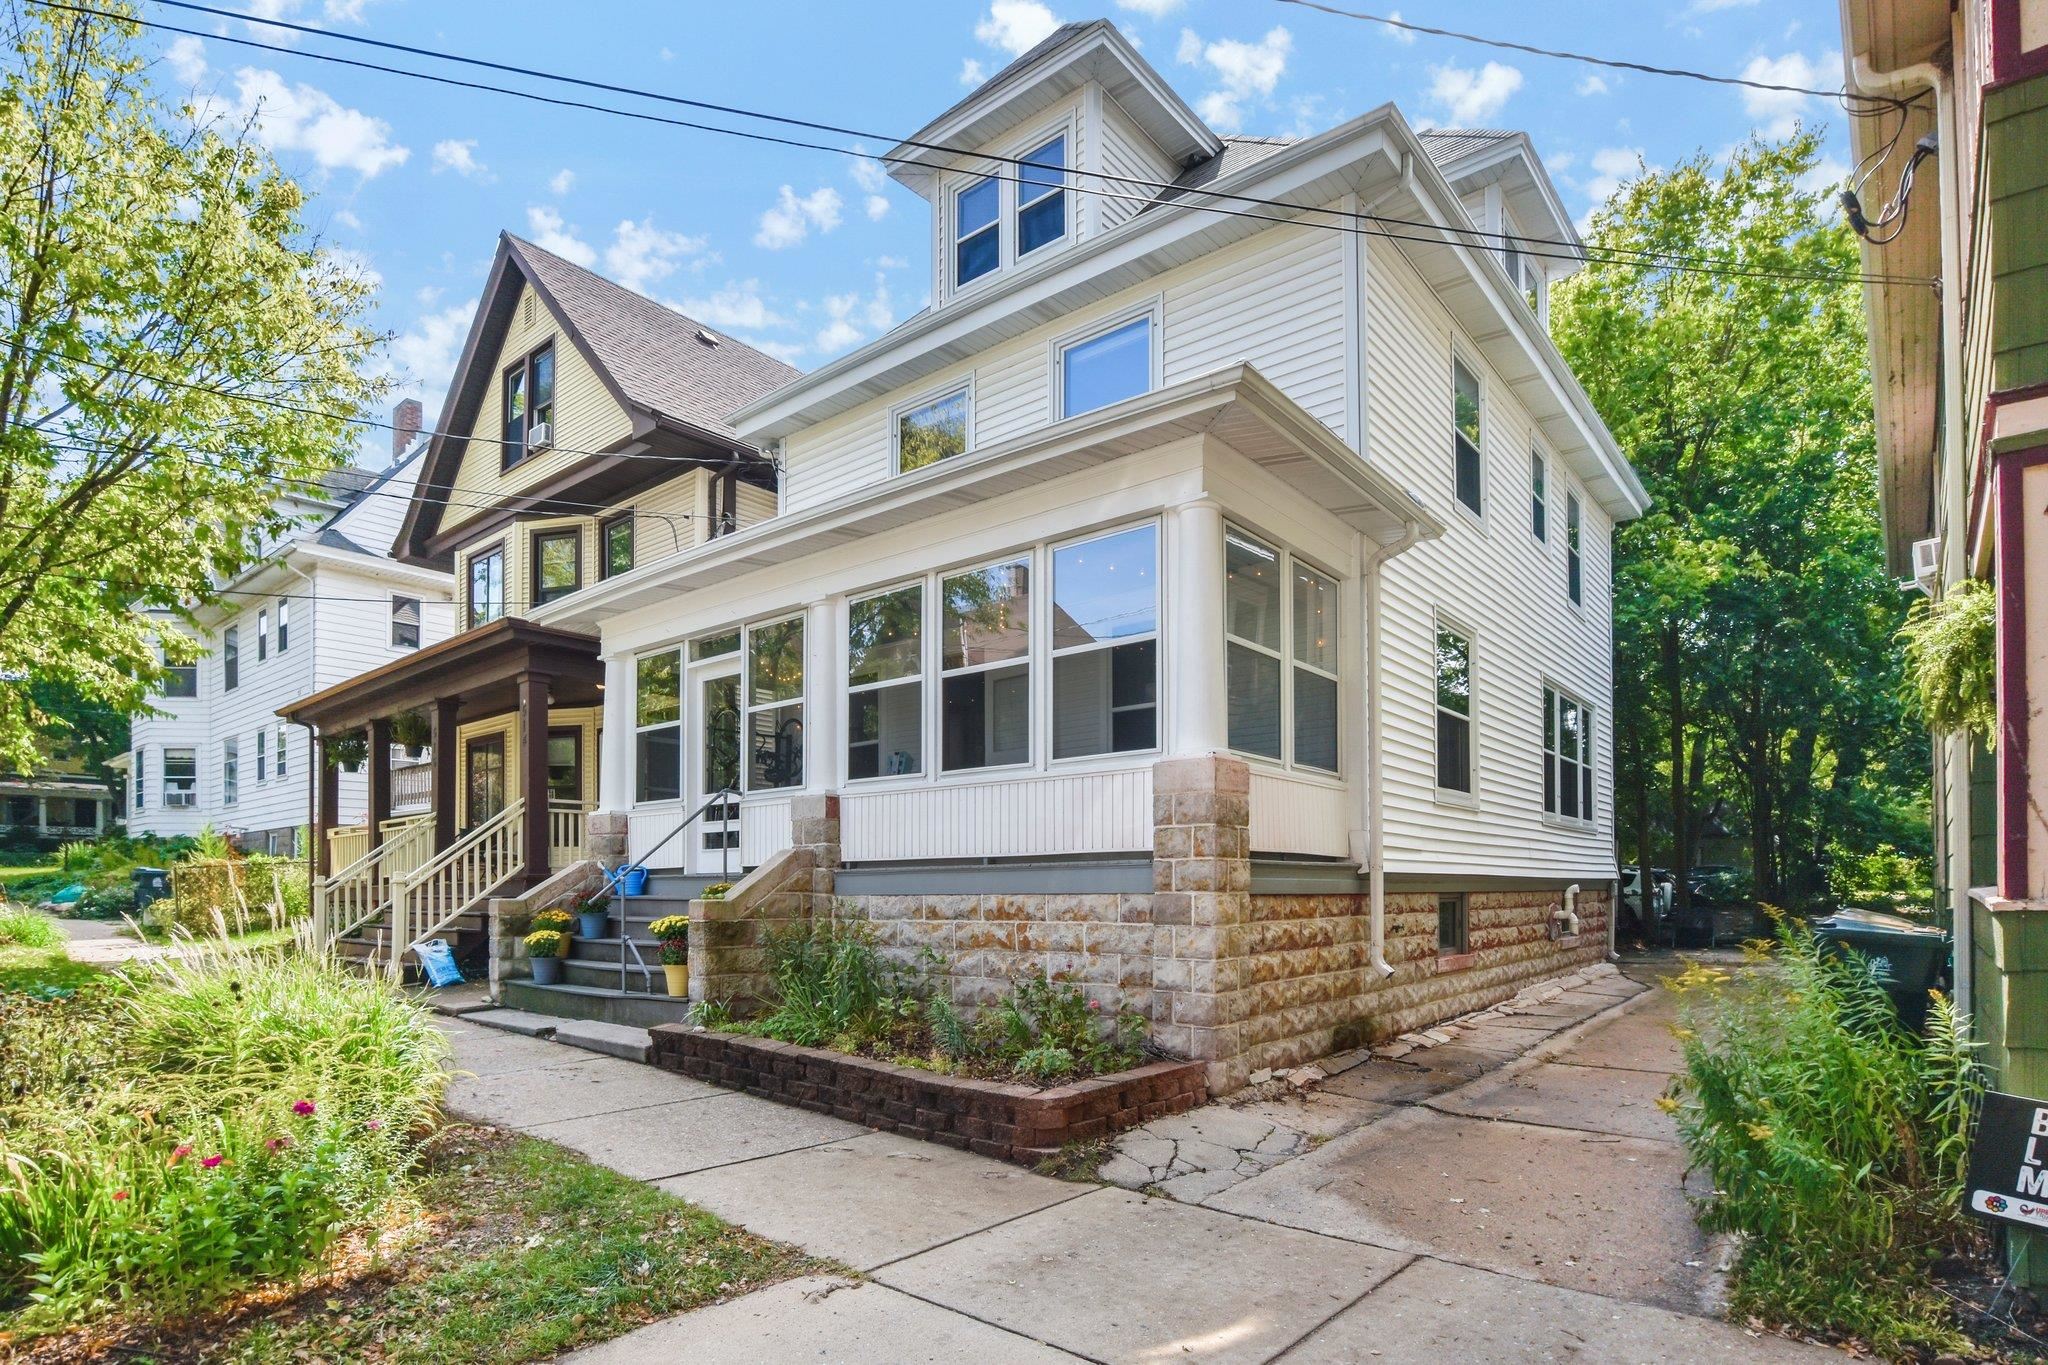 Show 9/22 Marquette Contemporary Victorian is sitting pretty w/extensive updates & an ideal locale next to Orton Park, BB Clark Beach & a short stroll to enjoy Willy St Faire! Classic 3 season porch perched above the St for privacy, perfect for al fresco dining! Architecturally stunning upon entry, original parlor room was opened into the living rm, highlighting the original staircase, woodwork & expansive windows! Remodeled kitchen boasts white cabinetry, SS appliances, breakfast bar & pantry. Spacious dining for gatherings or game night + a main flr 1/2 bath. Four bdrms & a remodeled bath w/heated flrs, built in cabinetry, soaking tub & tiled flr & surround! Walk up attic is ready to finish, plumbed bath & electrical. Covered back porch w/ brick patio & basement access for bike storage!